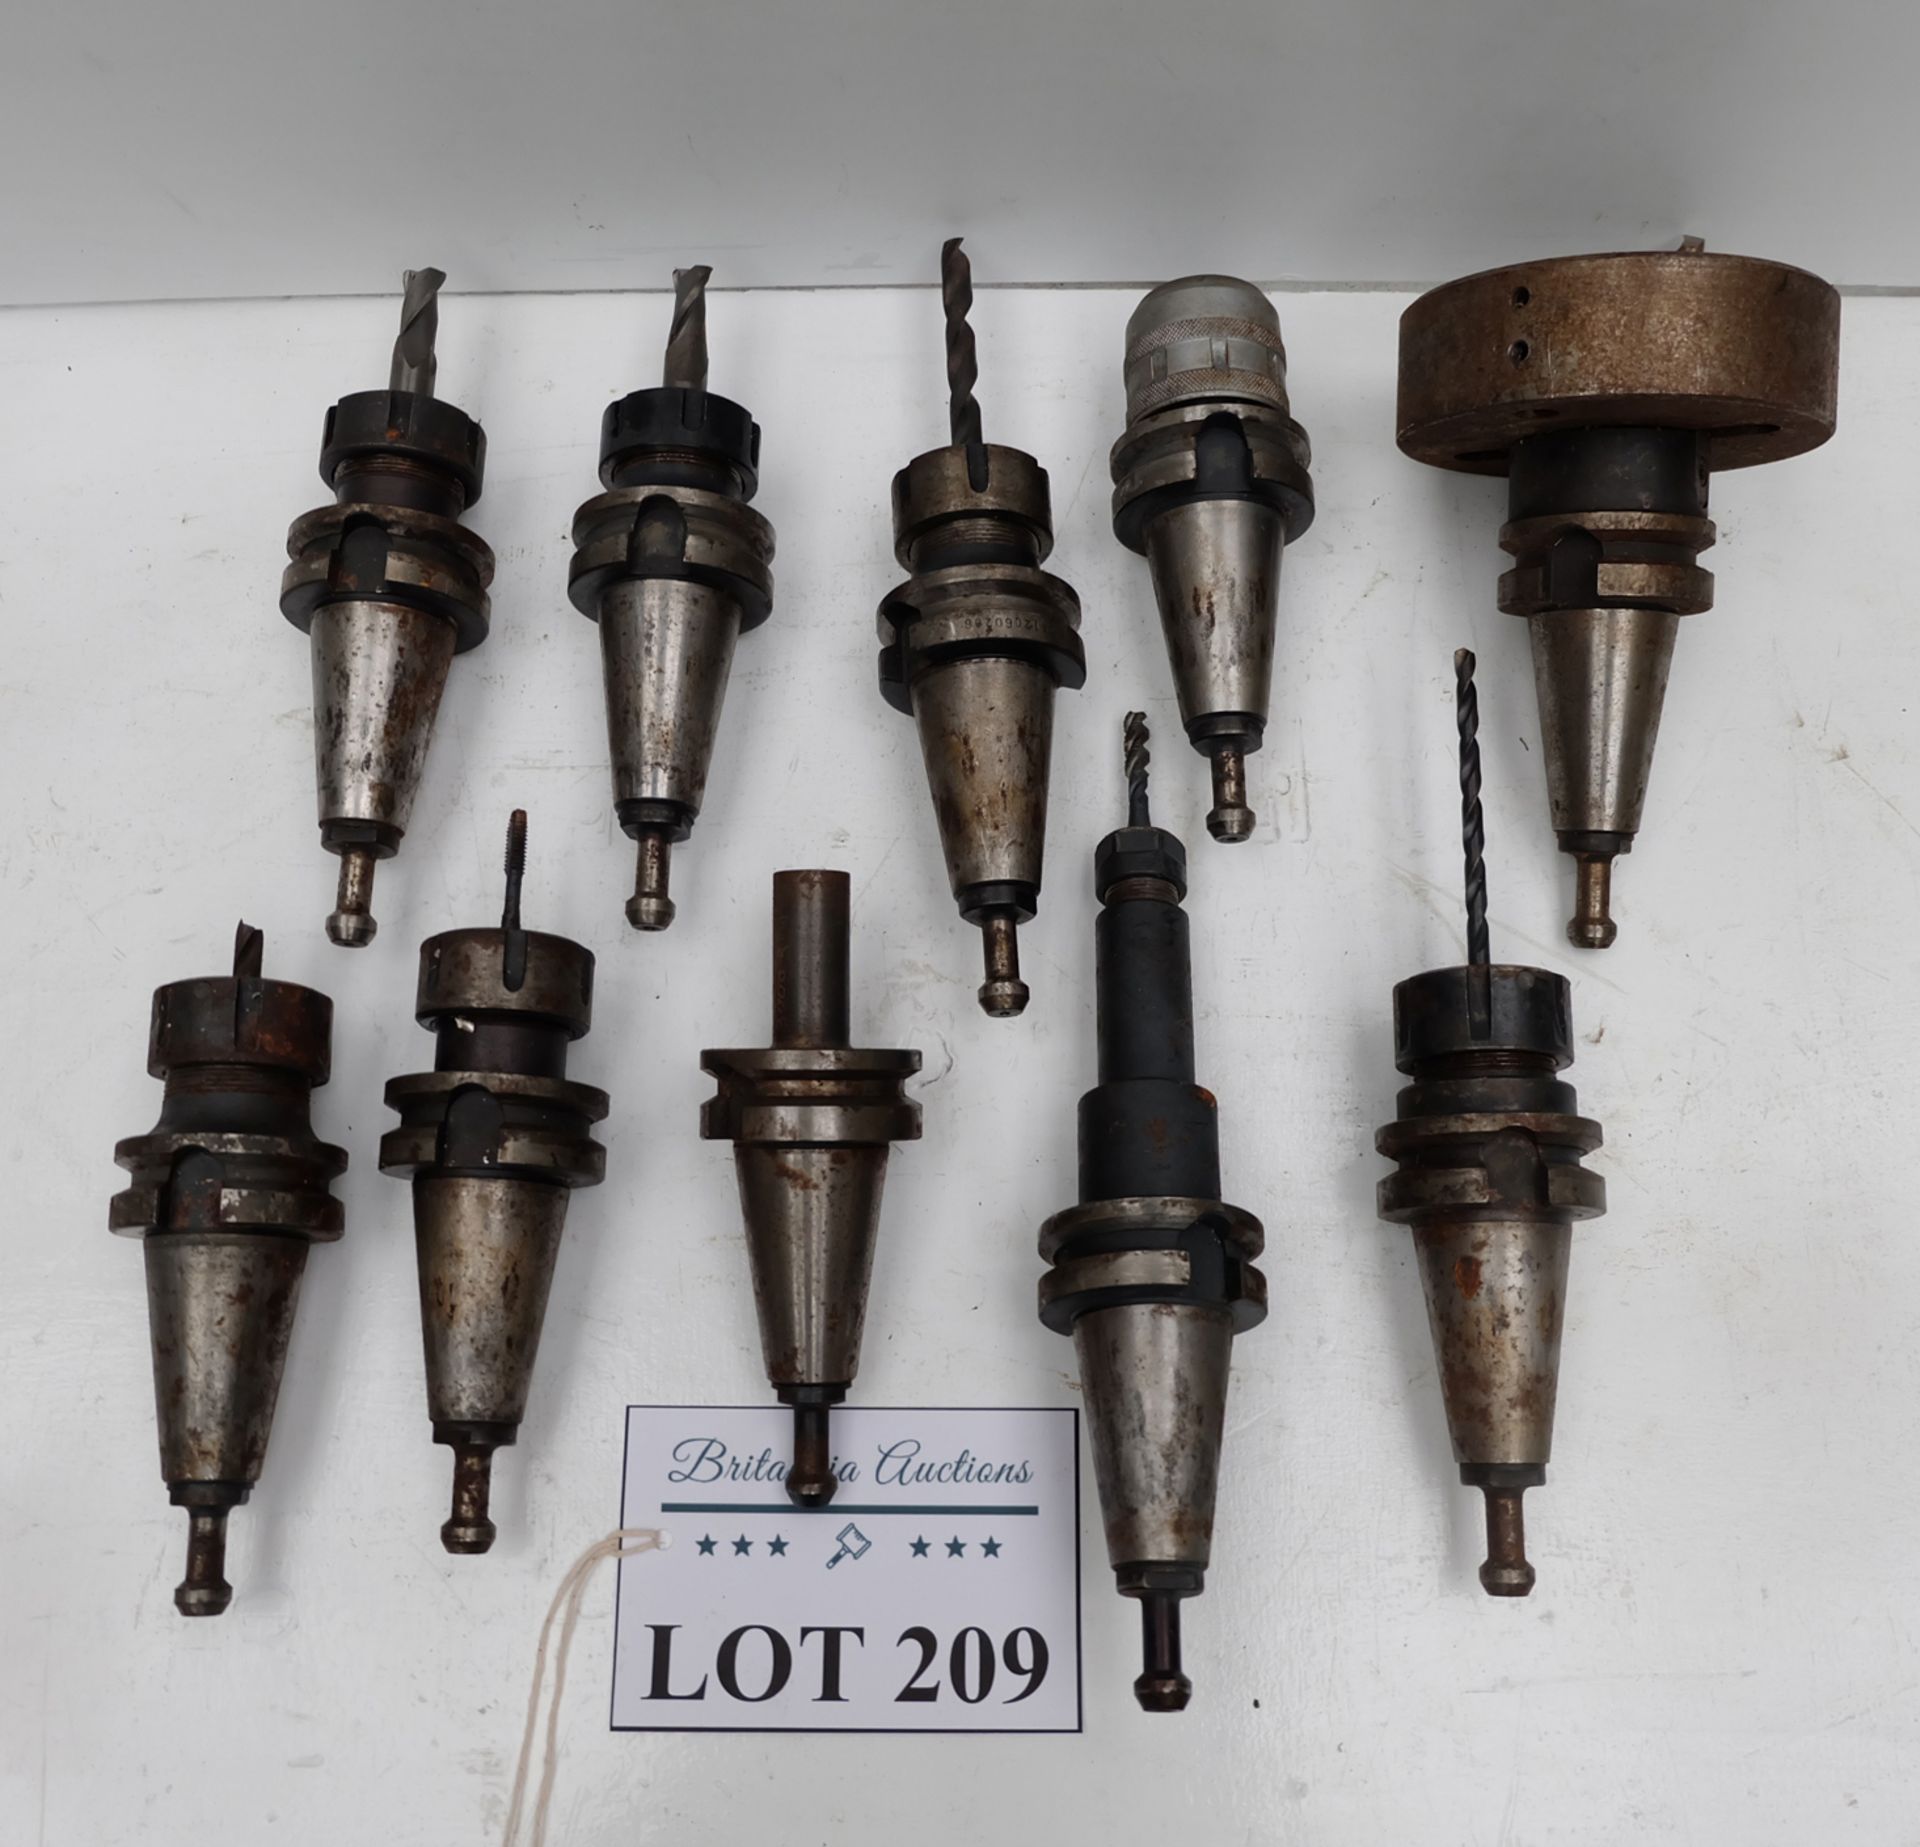 Quantity of 10 x BT 40 Spindle Tooling.